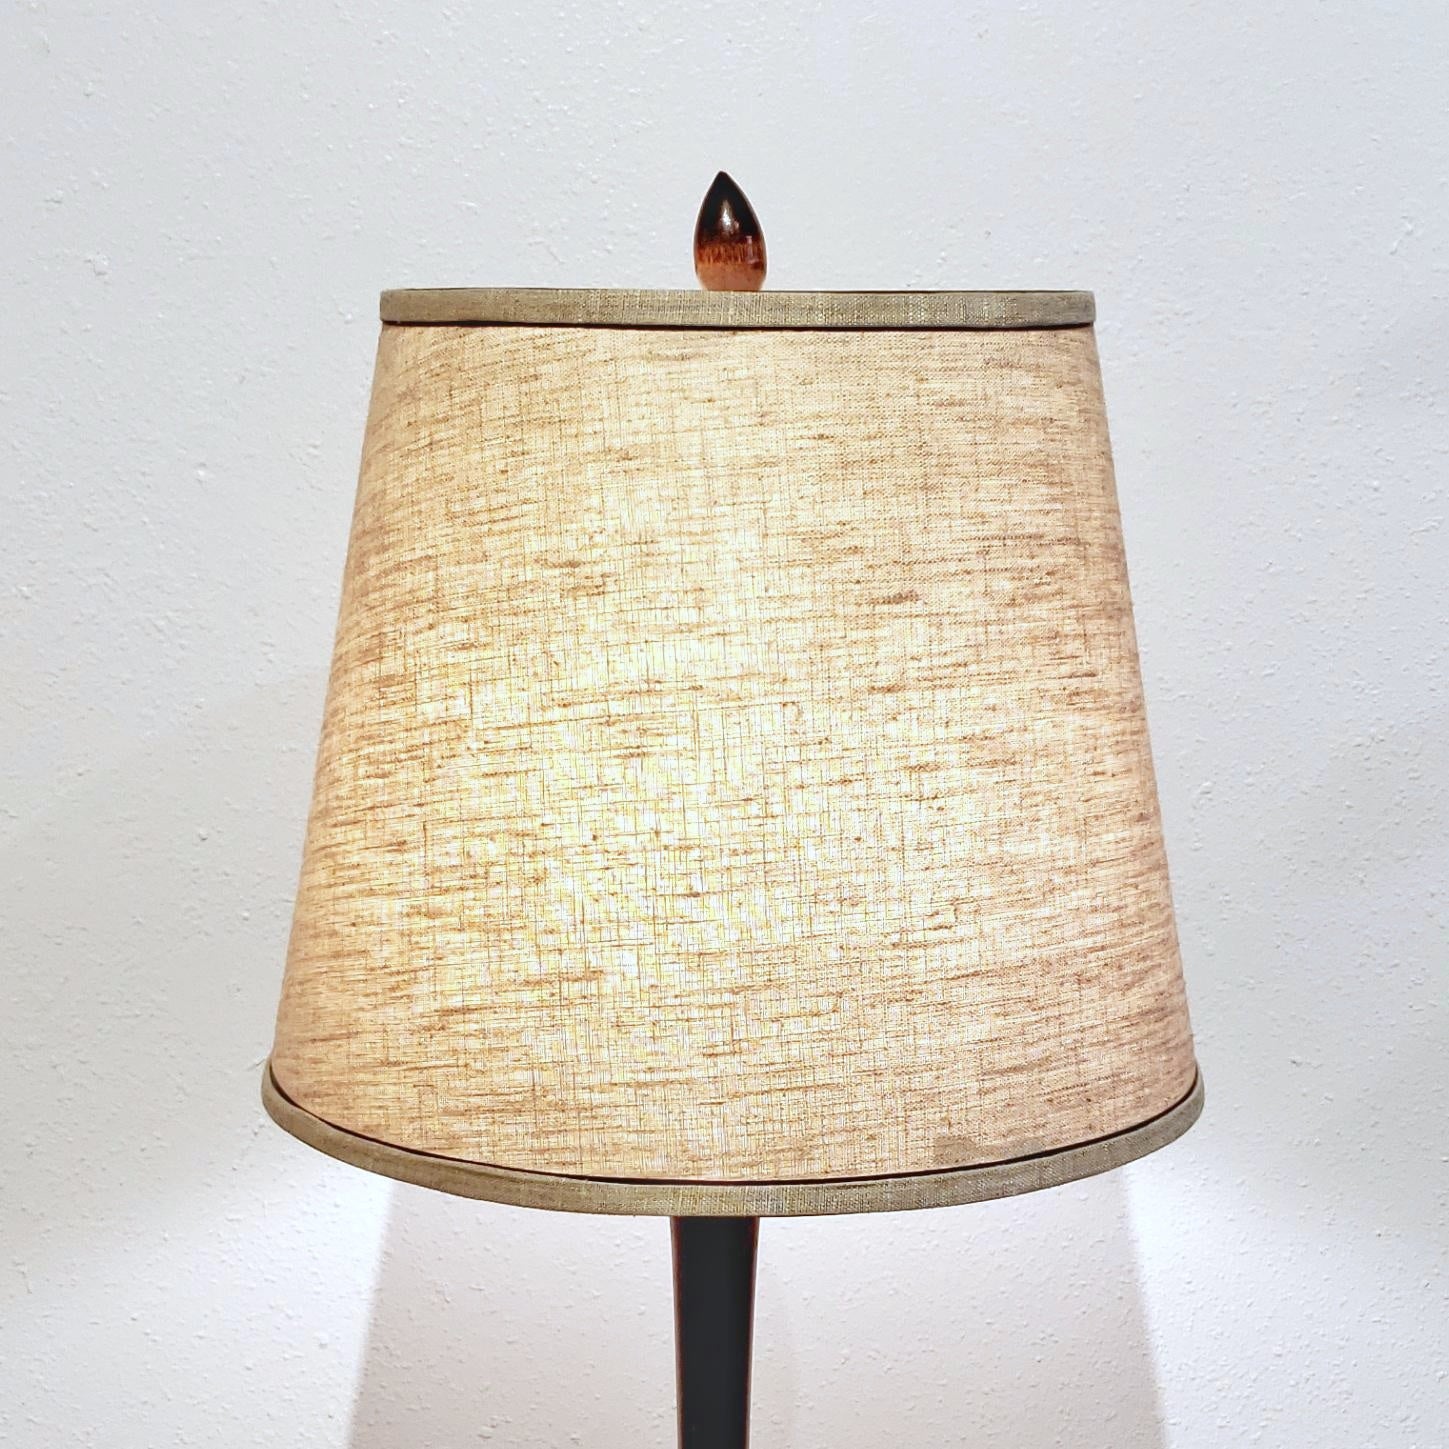 CERAMIC FLOOR LAMP IN THE STYLE OF MAURICE CHALVIGNAC